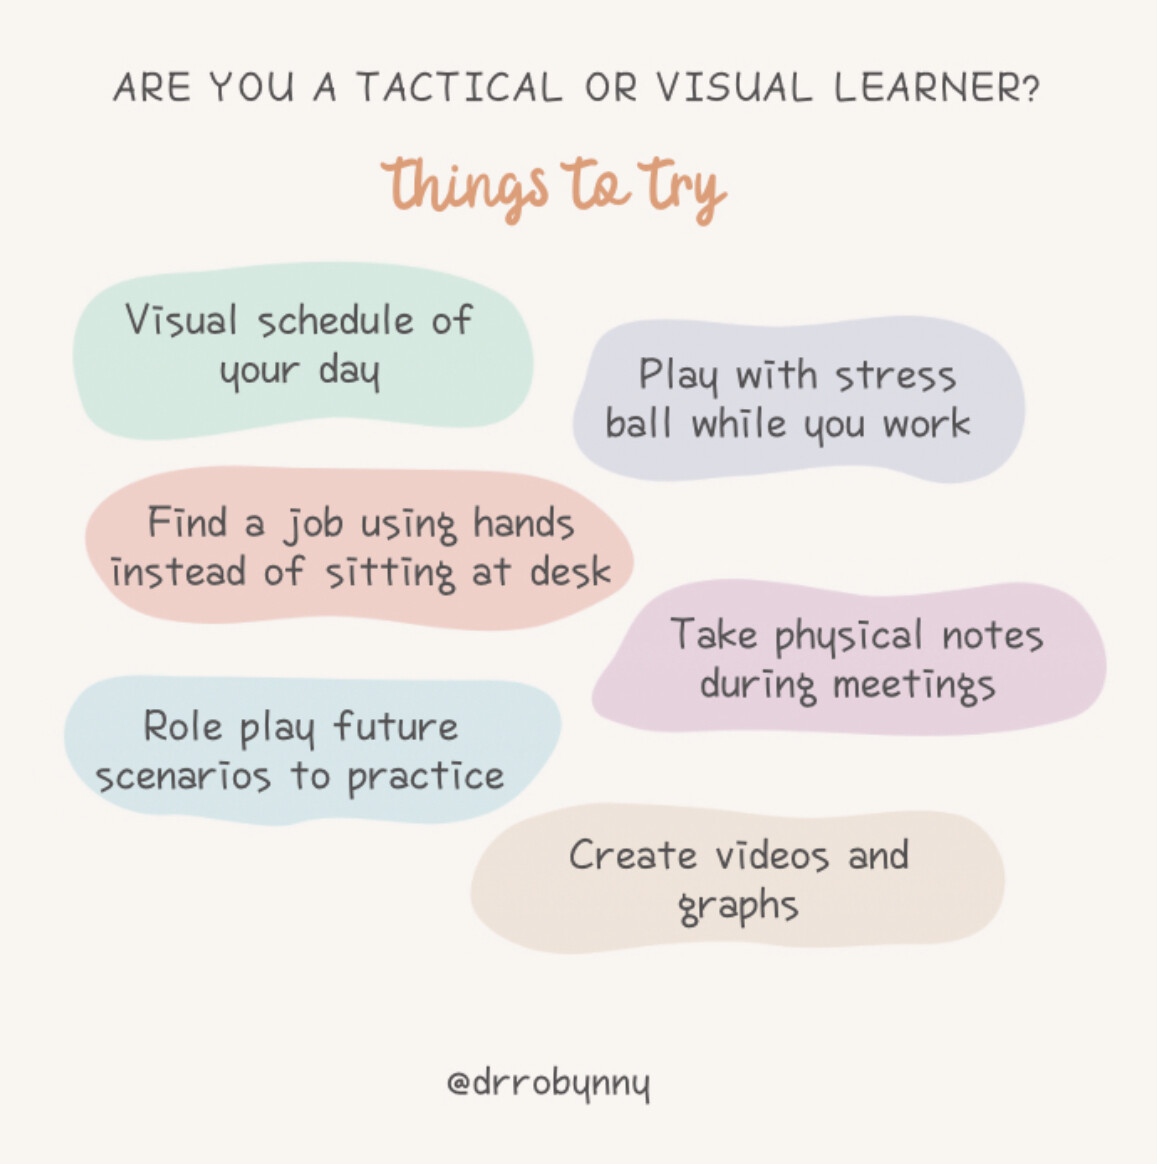 Are you a visual or kinesthetic learner?